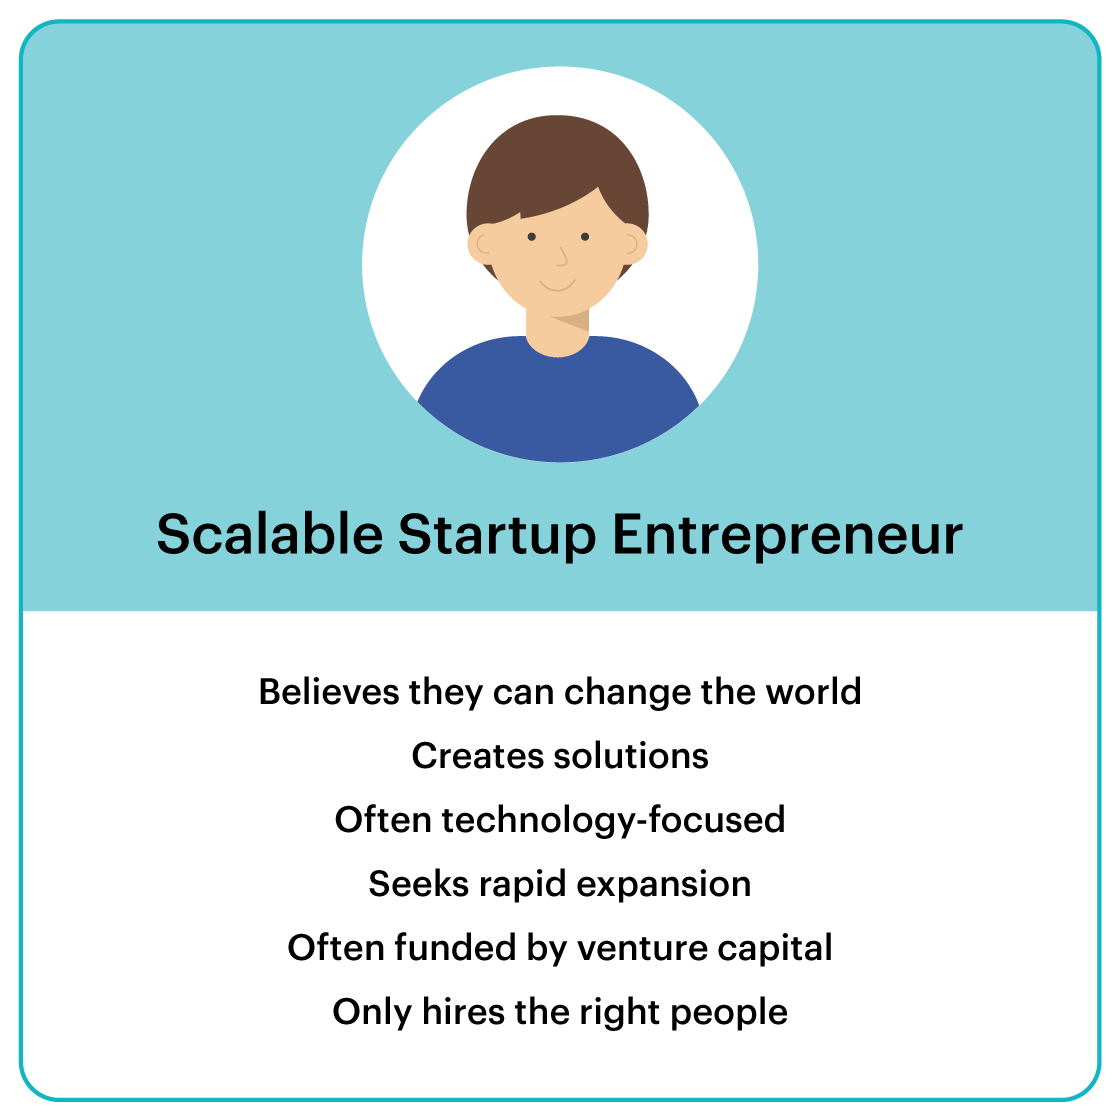 Infographic depicting an illustration of a scalable startup entrepreneur and 6 common characteristics